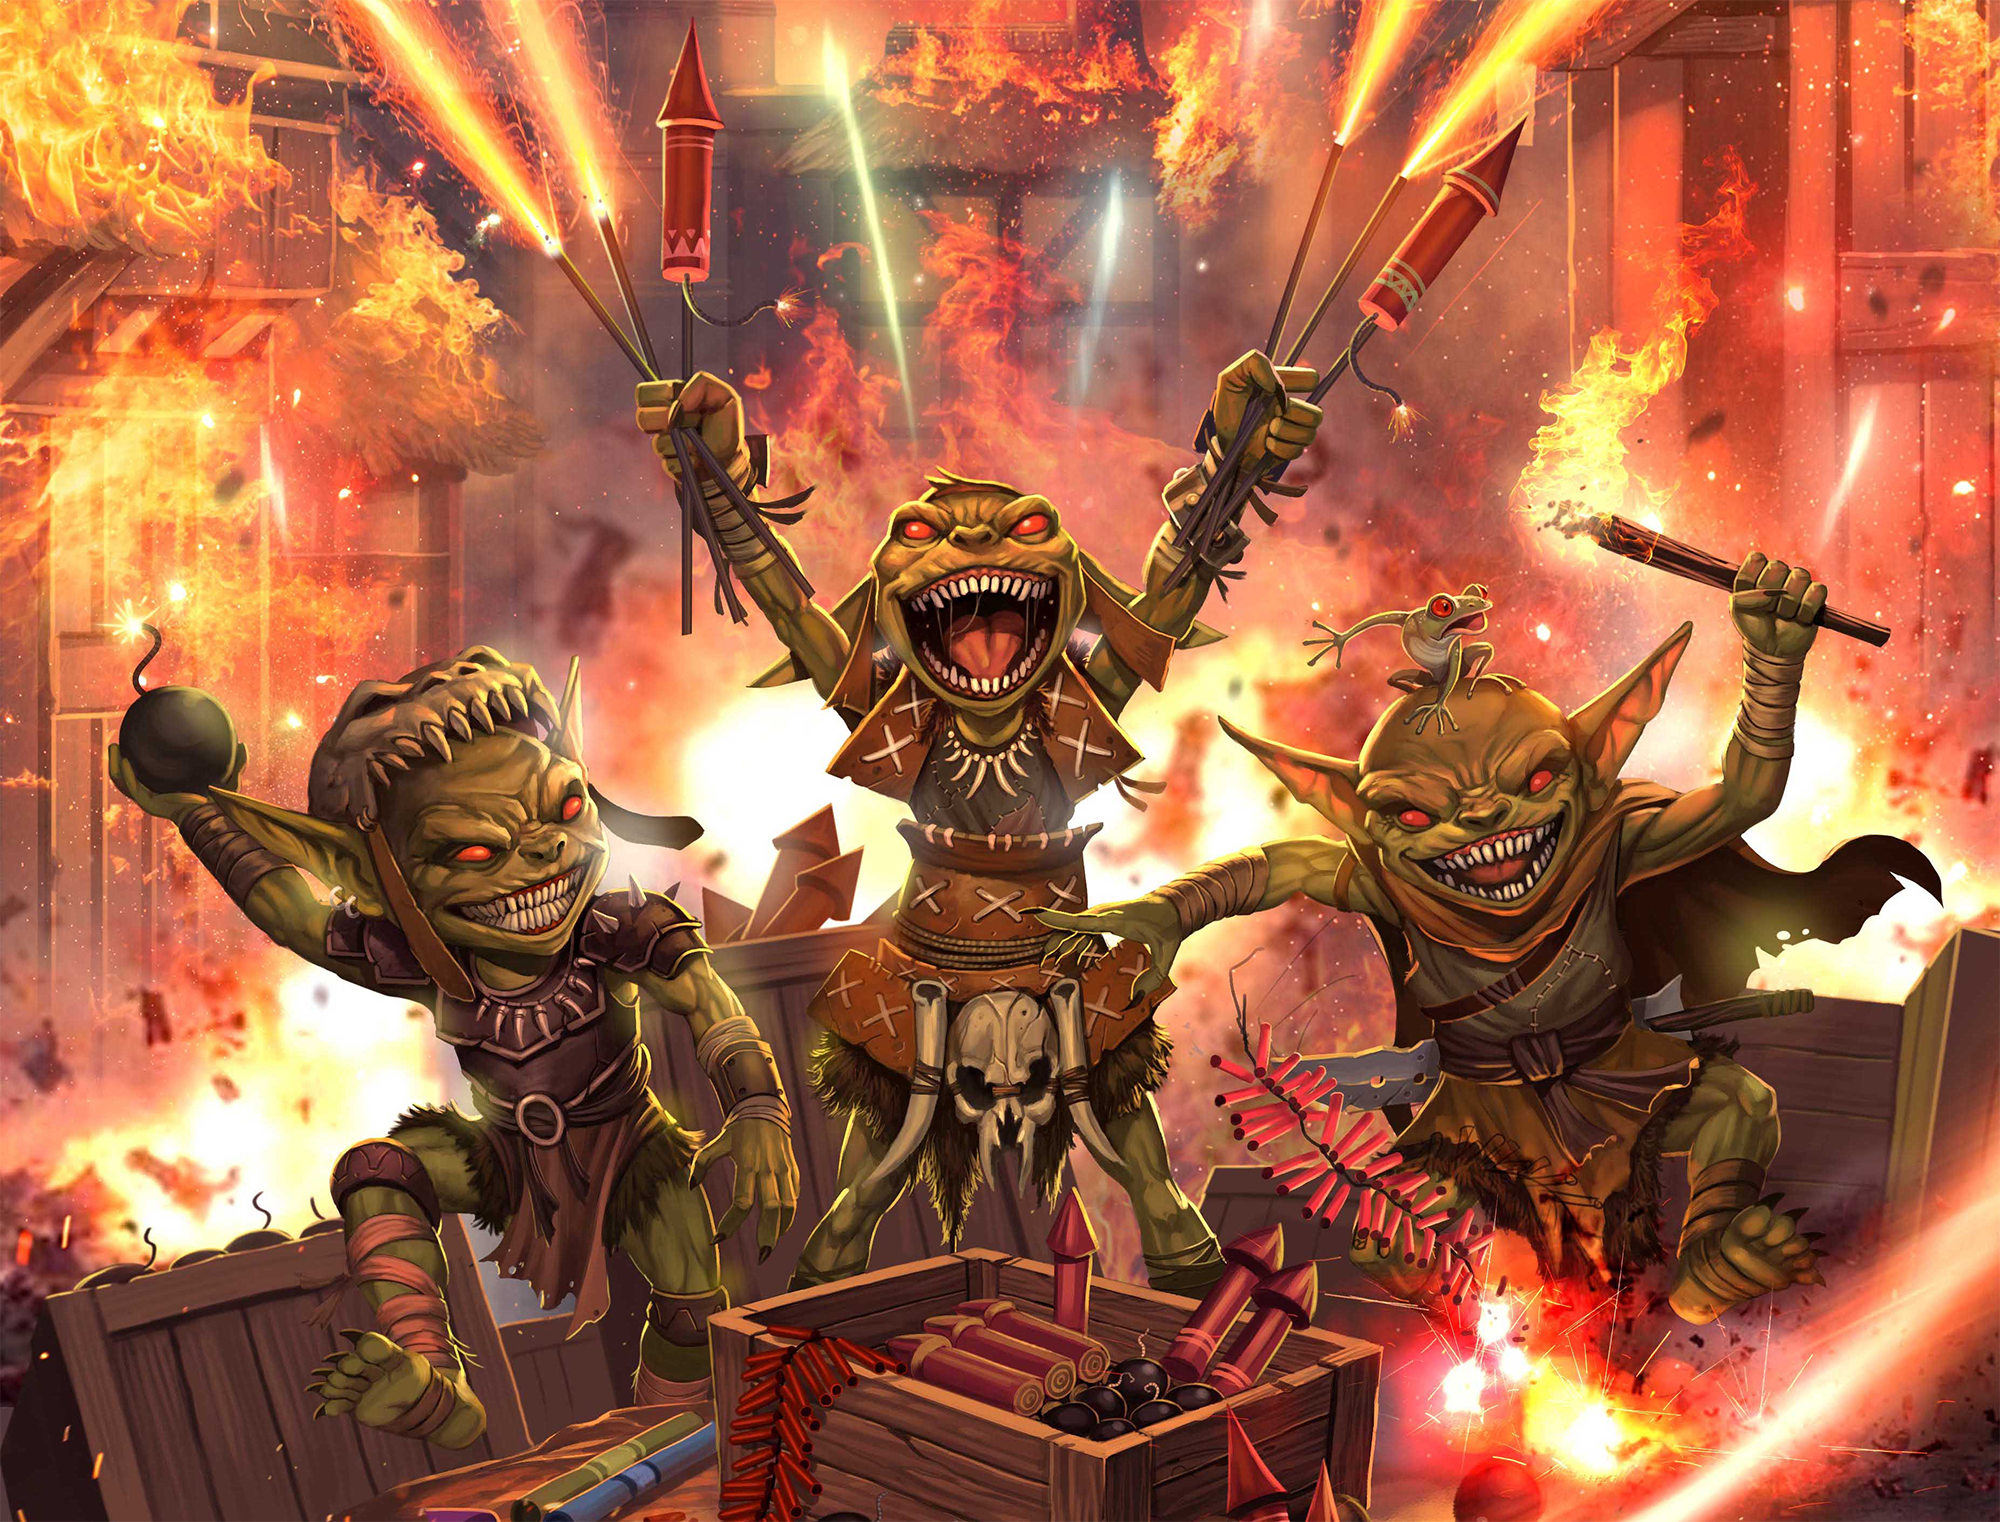 Three goblins stand atop a pile of fireworks, holding rockets and streamers with lit fuses above their heads. Behind and around them a town burns